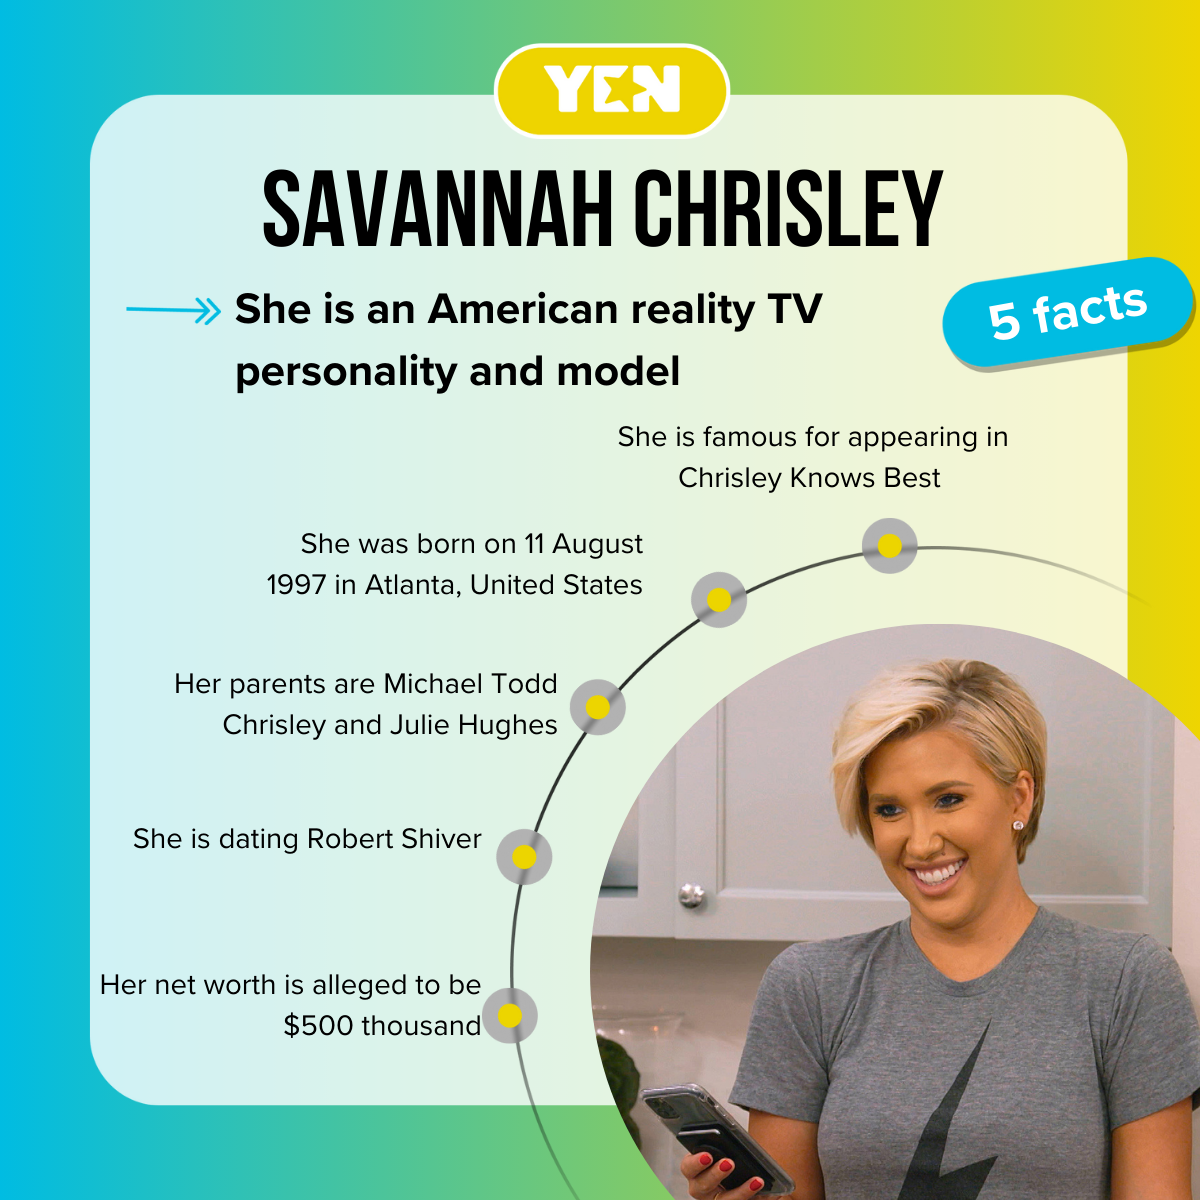 Five facts about Savannah Chrisley